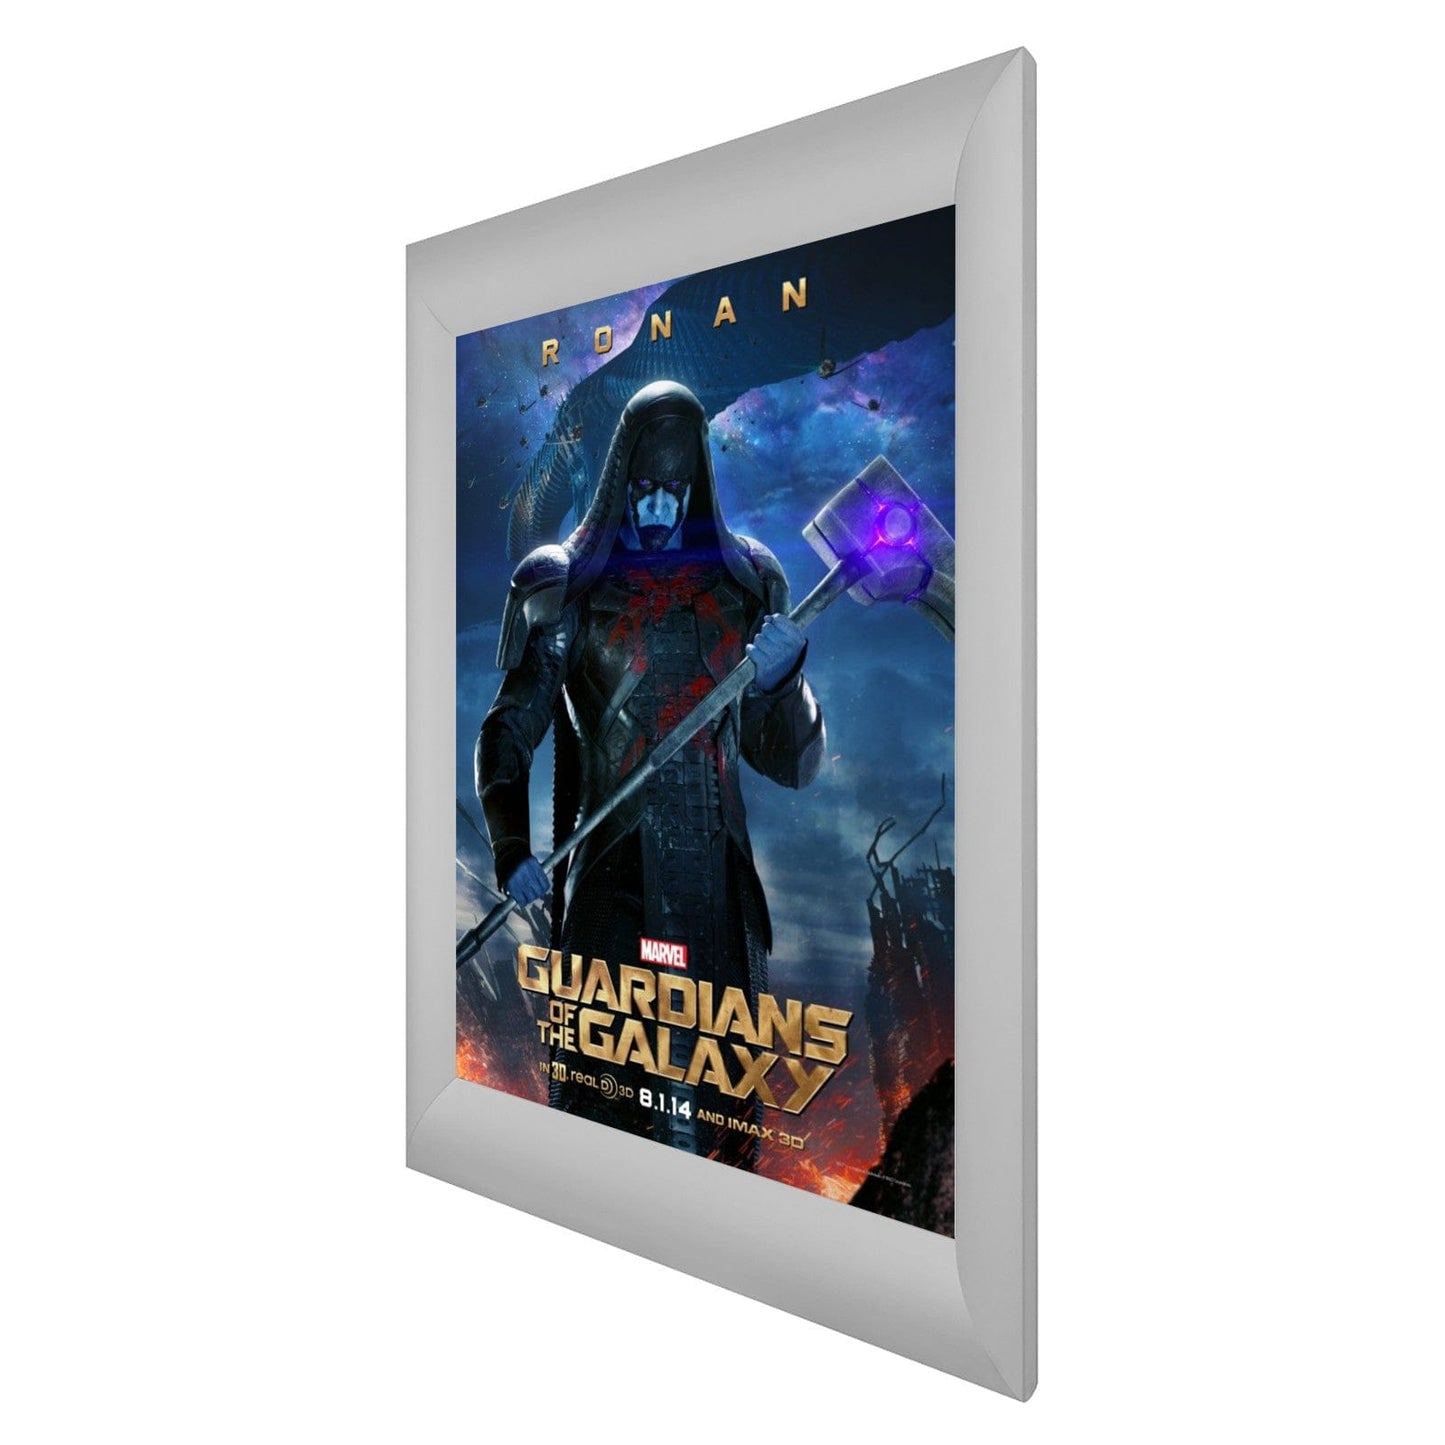 27x40 Inches Silver SnapeZo® Snap Frame - 2.2" profile - Snap Frames Direct